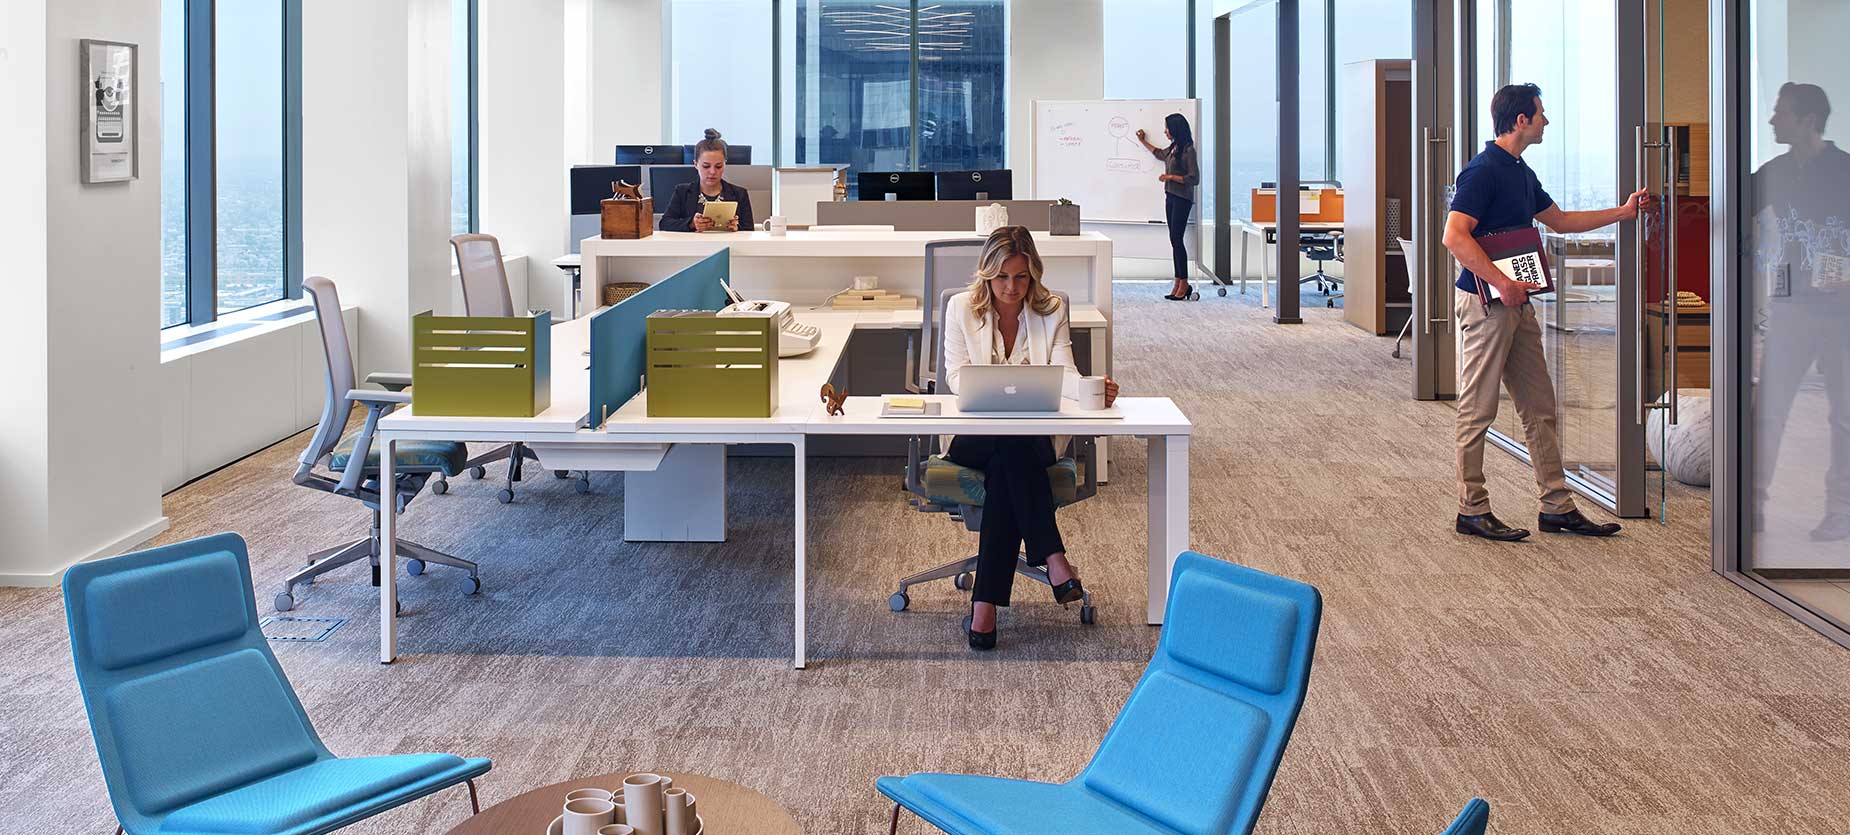 The layering of spaces is demonstrated here in showing how a workstation can be a close neighbor to other Social Spaces and lounge areas. This environment allows for work to be done but the ability to be connected to what is happening within the office environment.